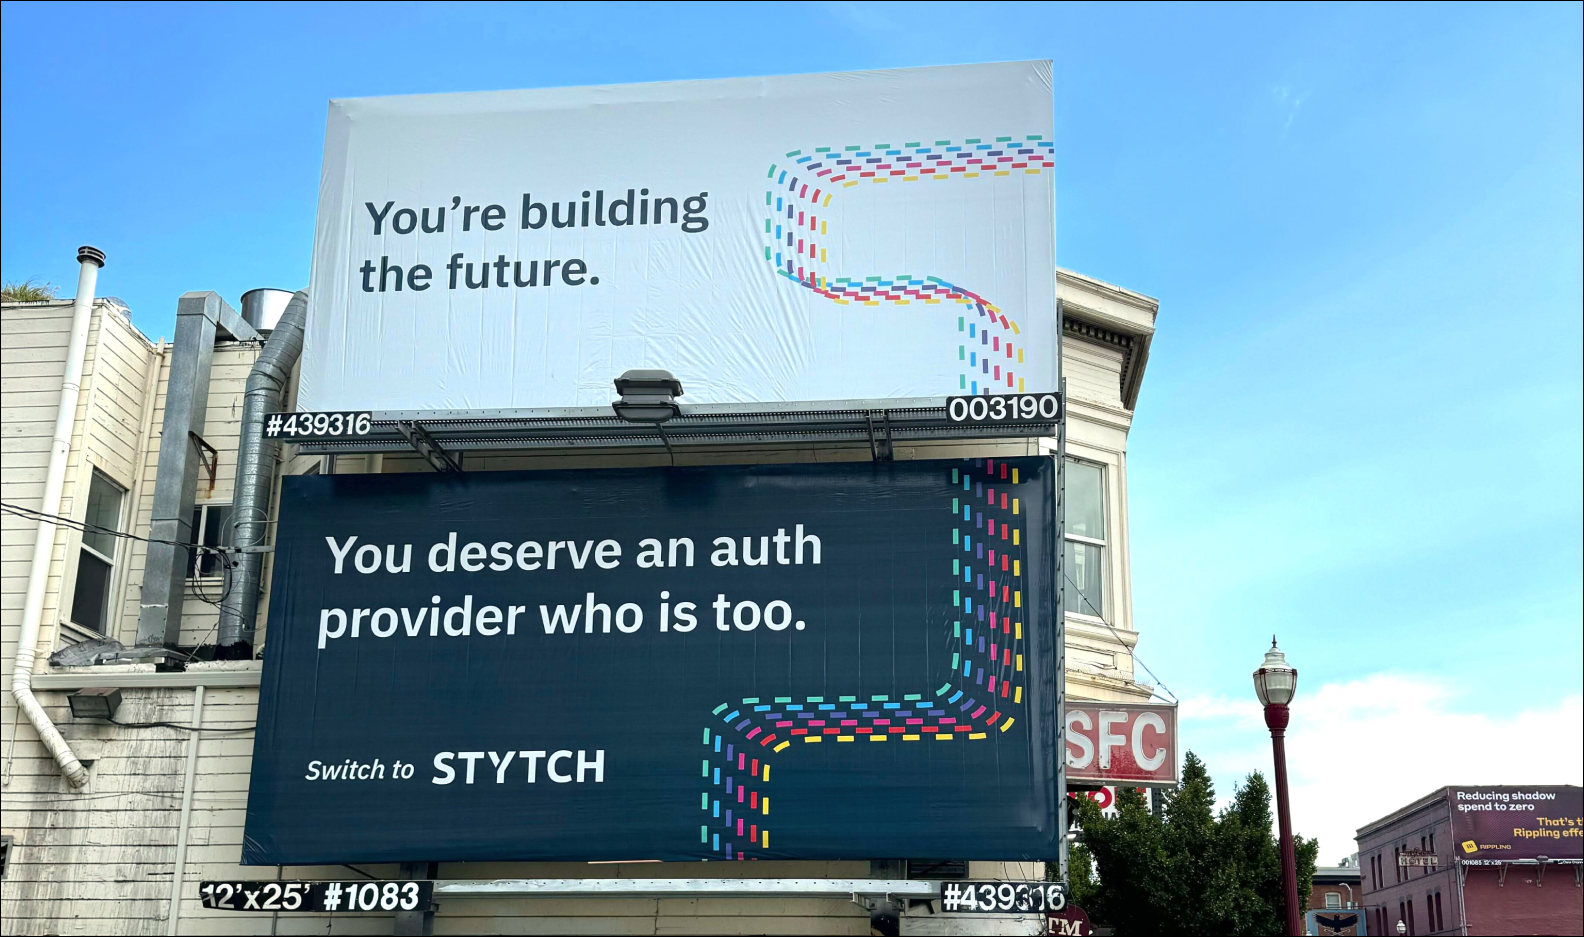 Billboard reading "You're building the future, you deserve an auth provider who is too."